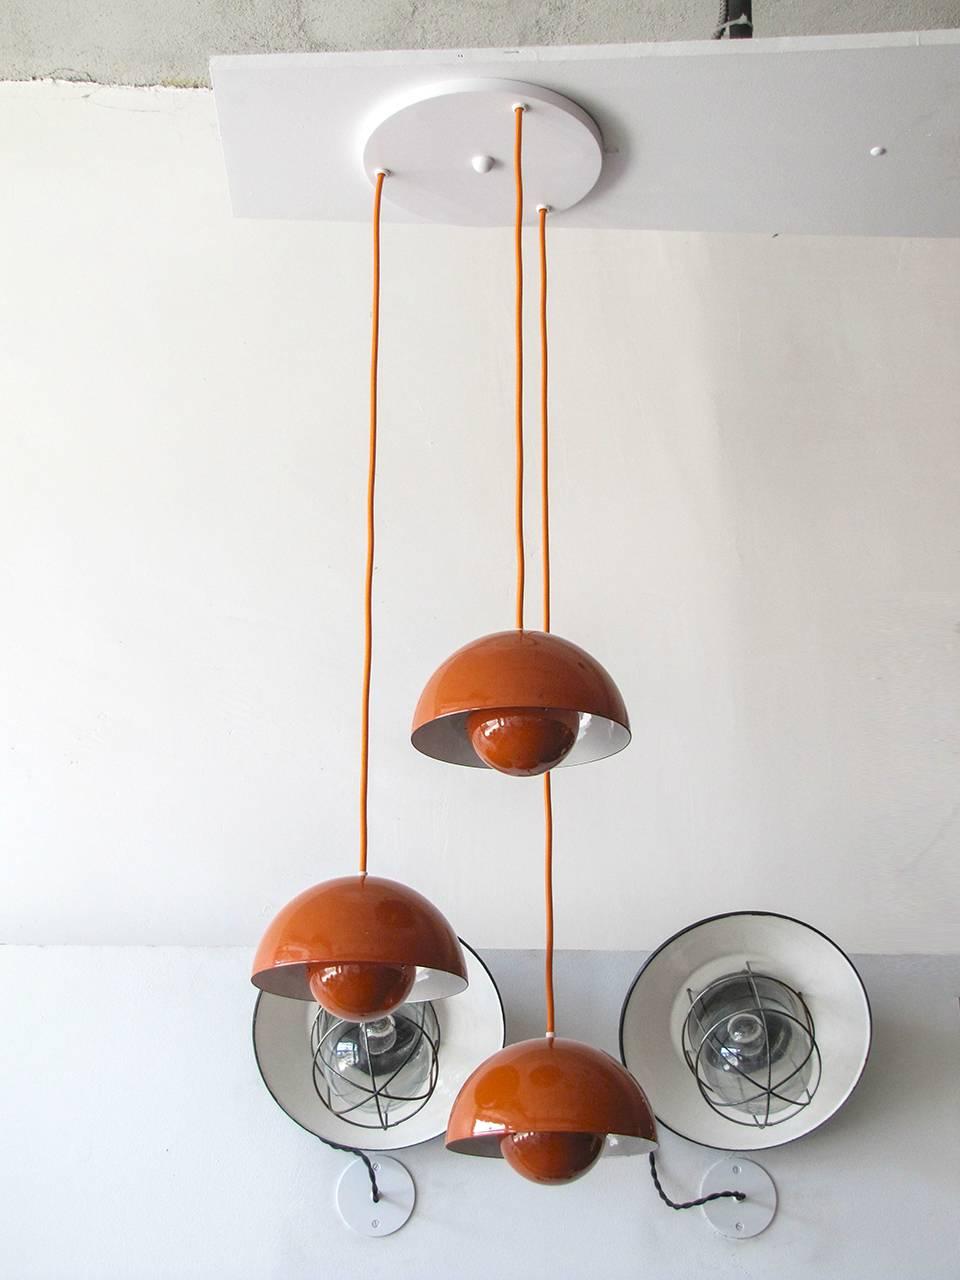 wonderful 1970's Flower Pot hanging lights by Verner Panton for Louis Poulsen, three orange enameled pieces with matching colored cords on a single canopy, insides of the reflector spheres is orange, heights are adjustable, a total of seven